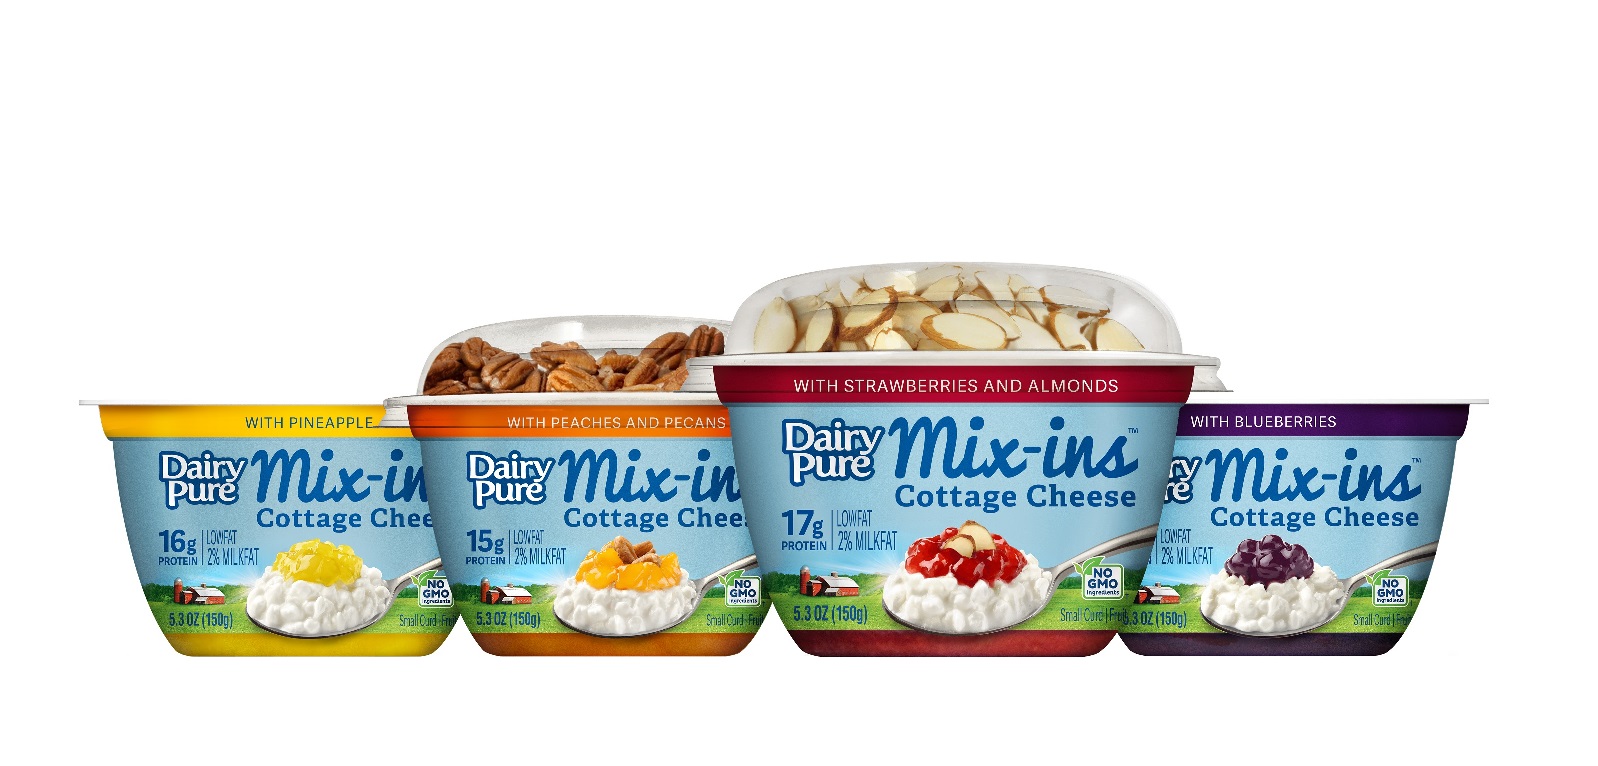 Cottage cheese gets a revamp to appeal to the modern consumer